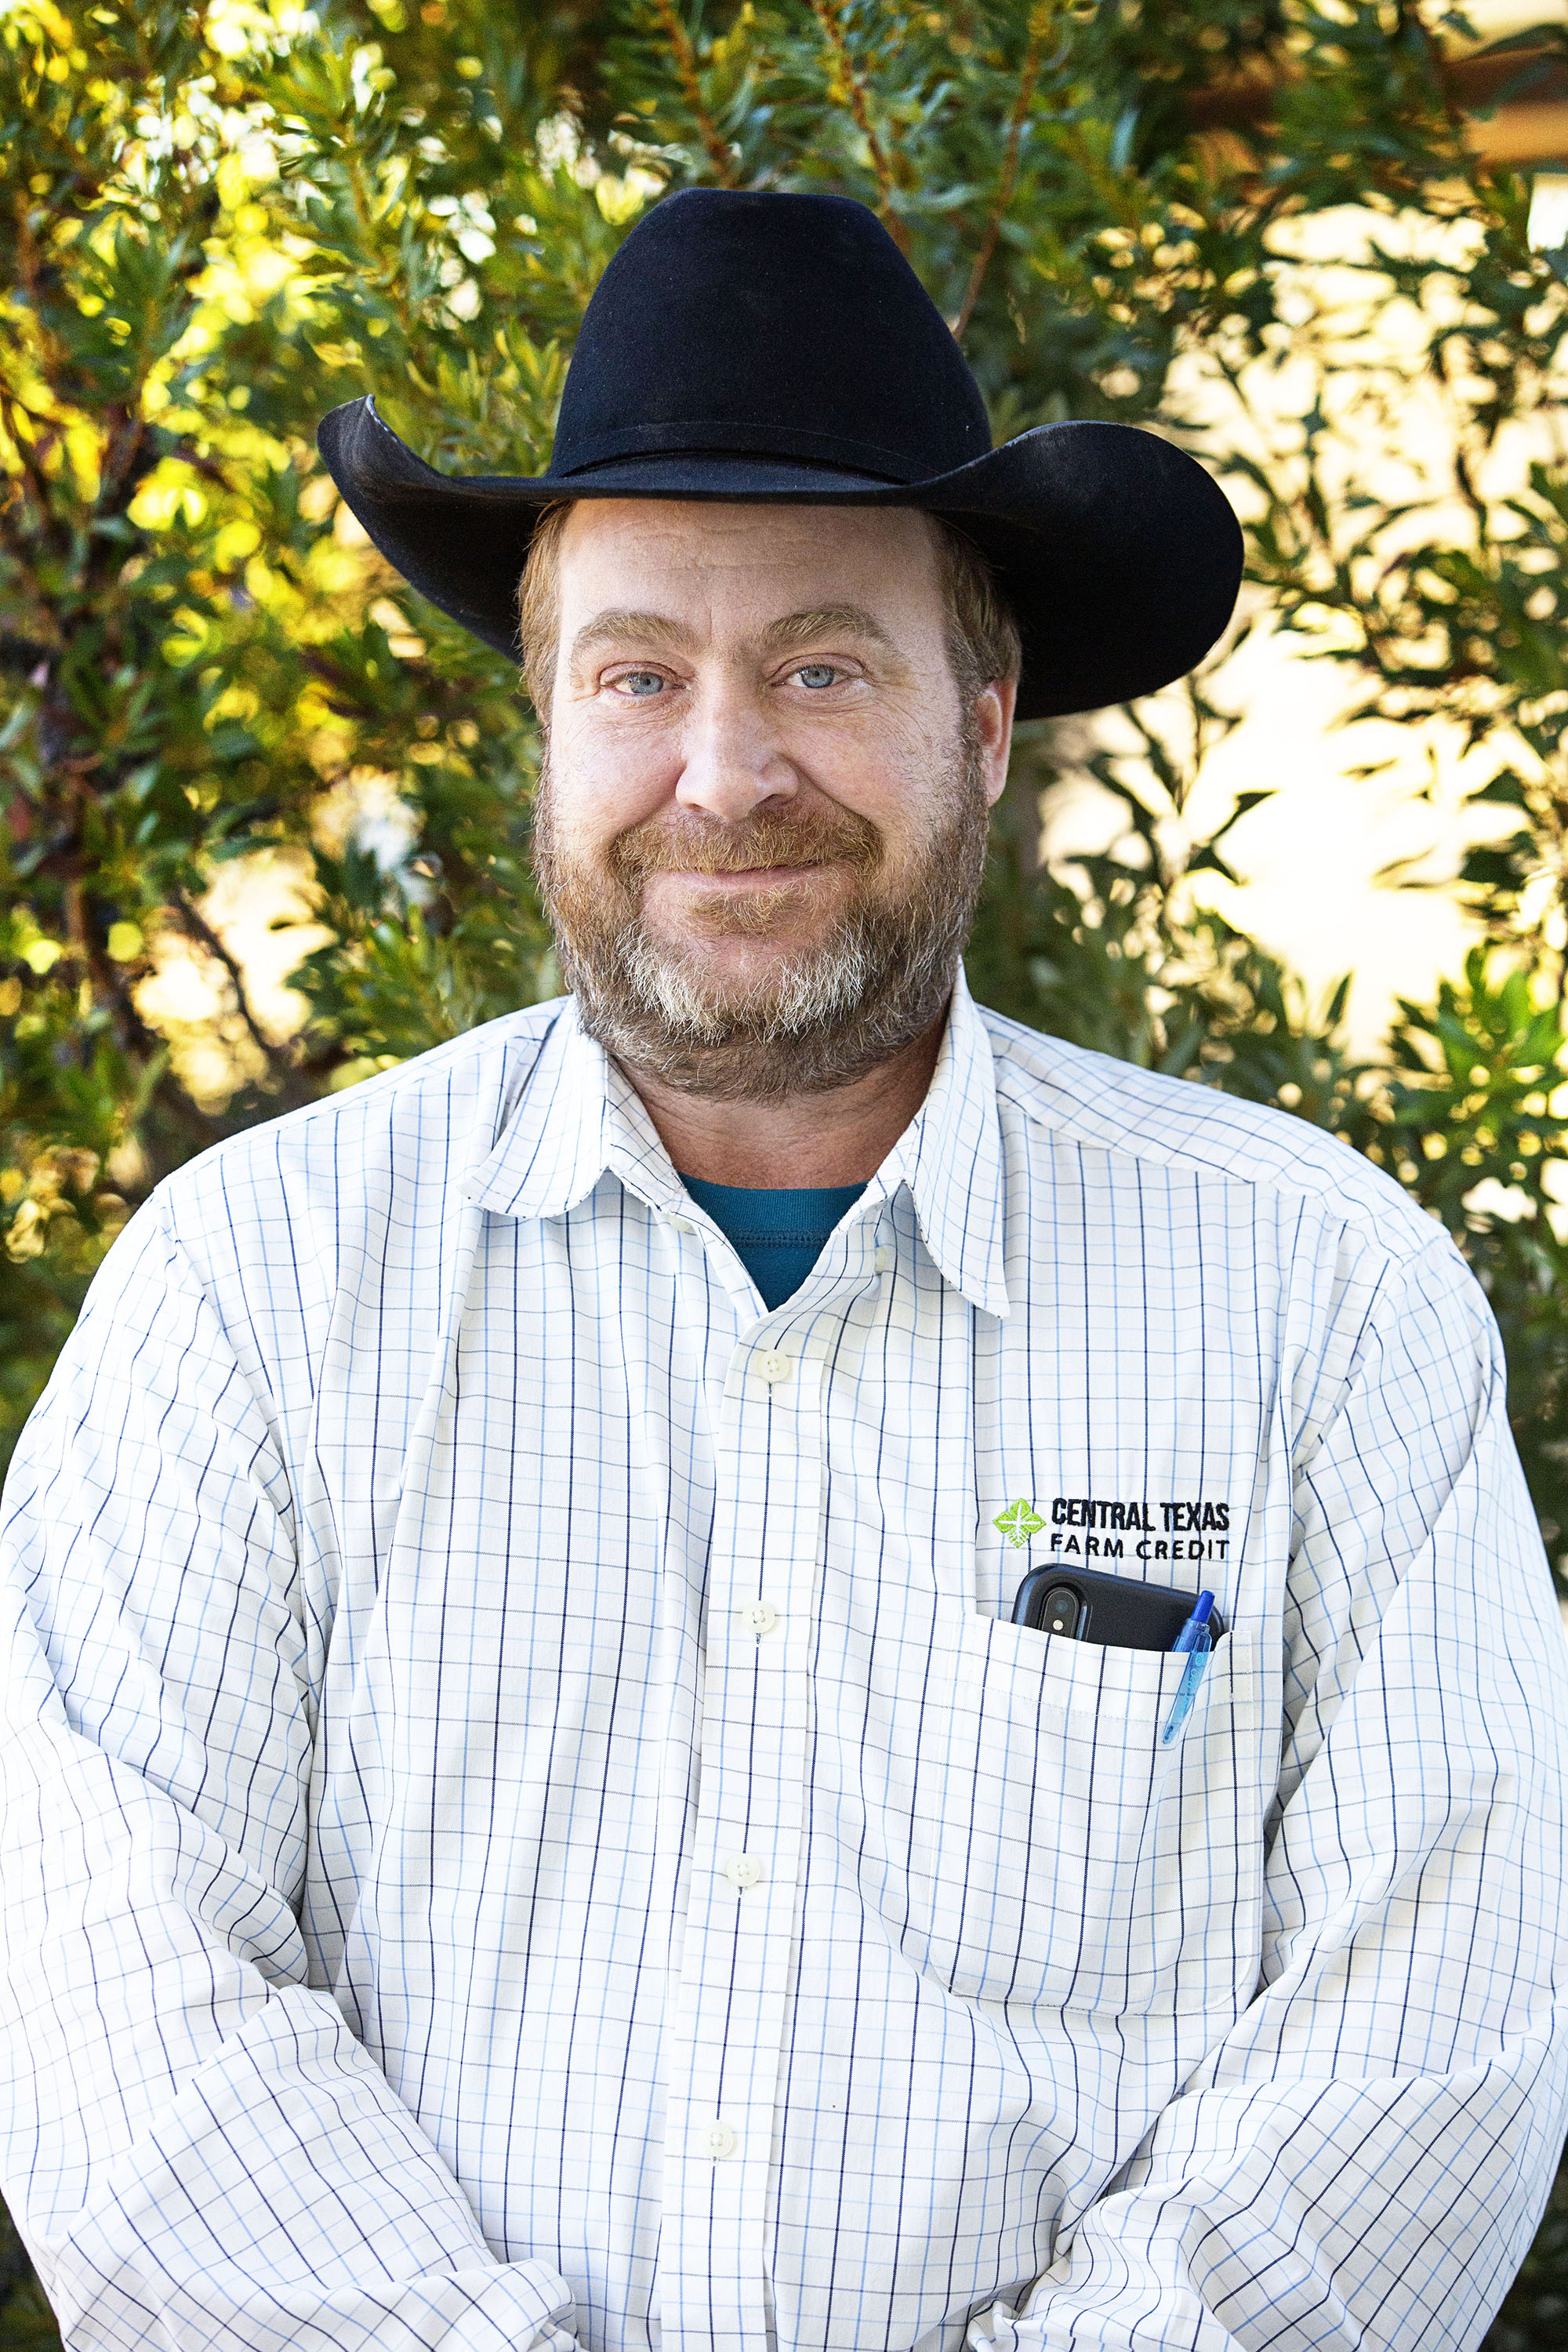 Central Texas Farm Credit stockholders re-elected Robby Halfmann of Ballinger to the rural lending cooperative’s board of directors.